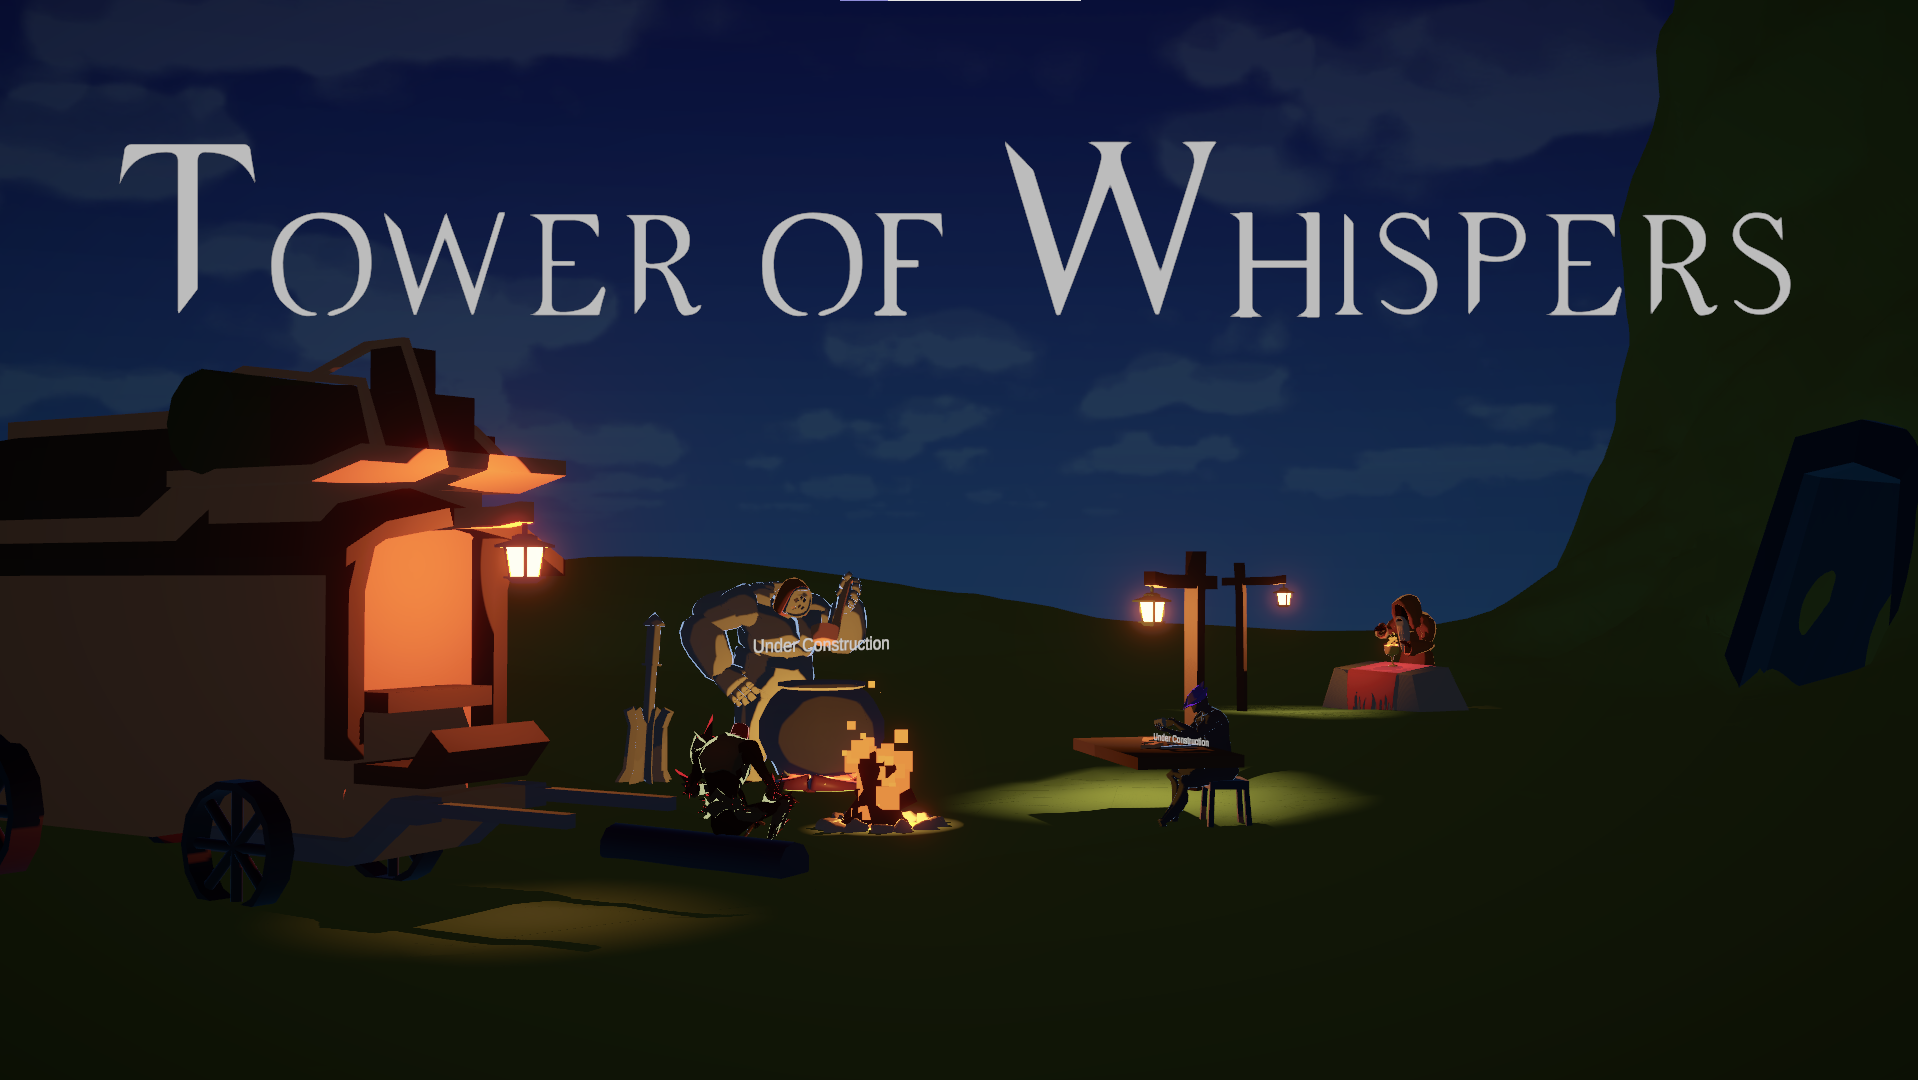 Tower of Whispers